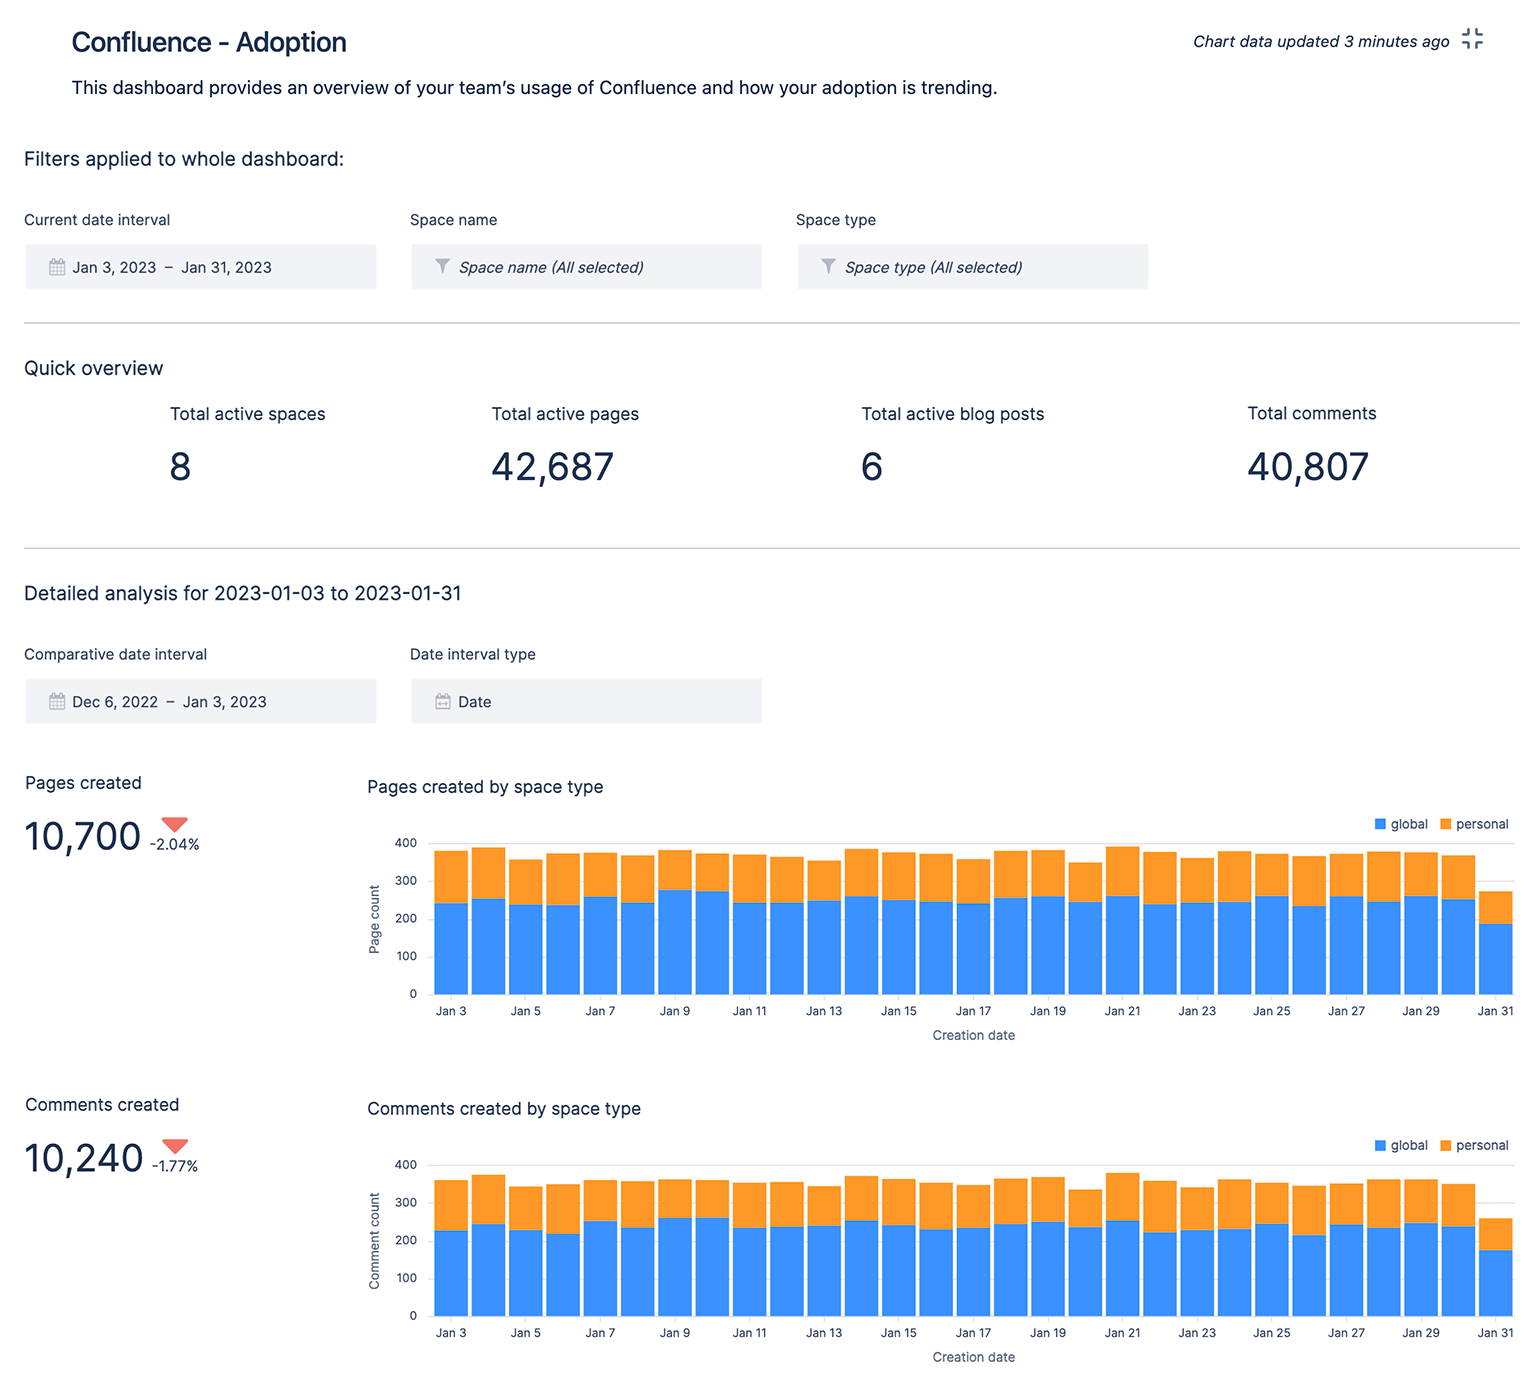 A Confluence adoption dashboard in Atlassian Analytics shows metrics used by business teams to track total active pages, comments, blog posts, and spaces. It also shows total pages created by space type and comments created by space type.